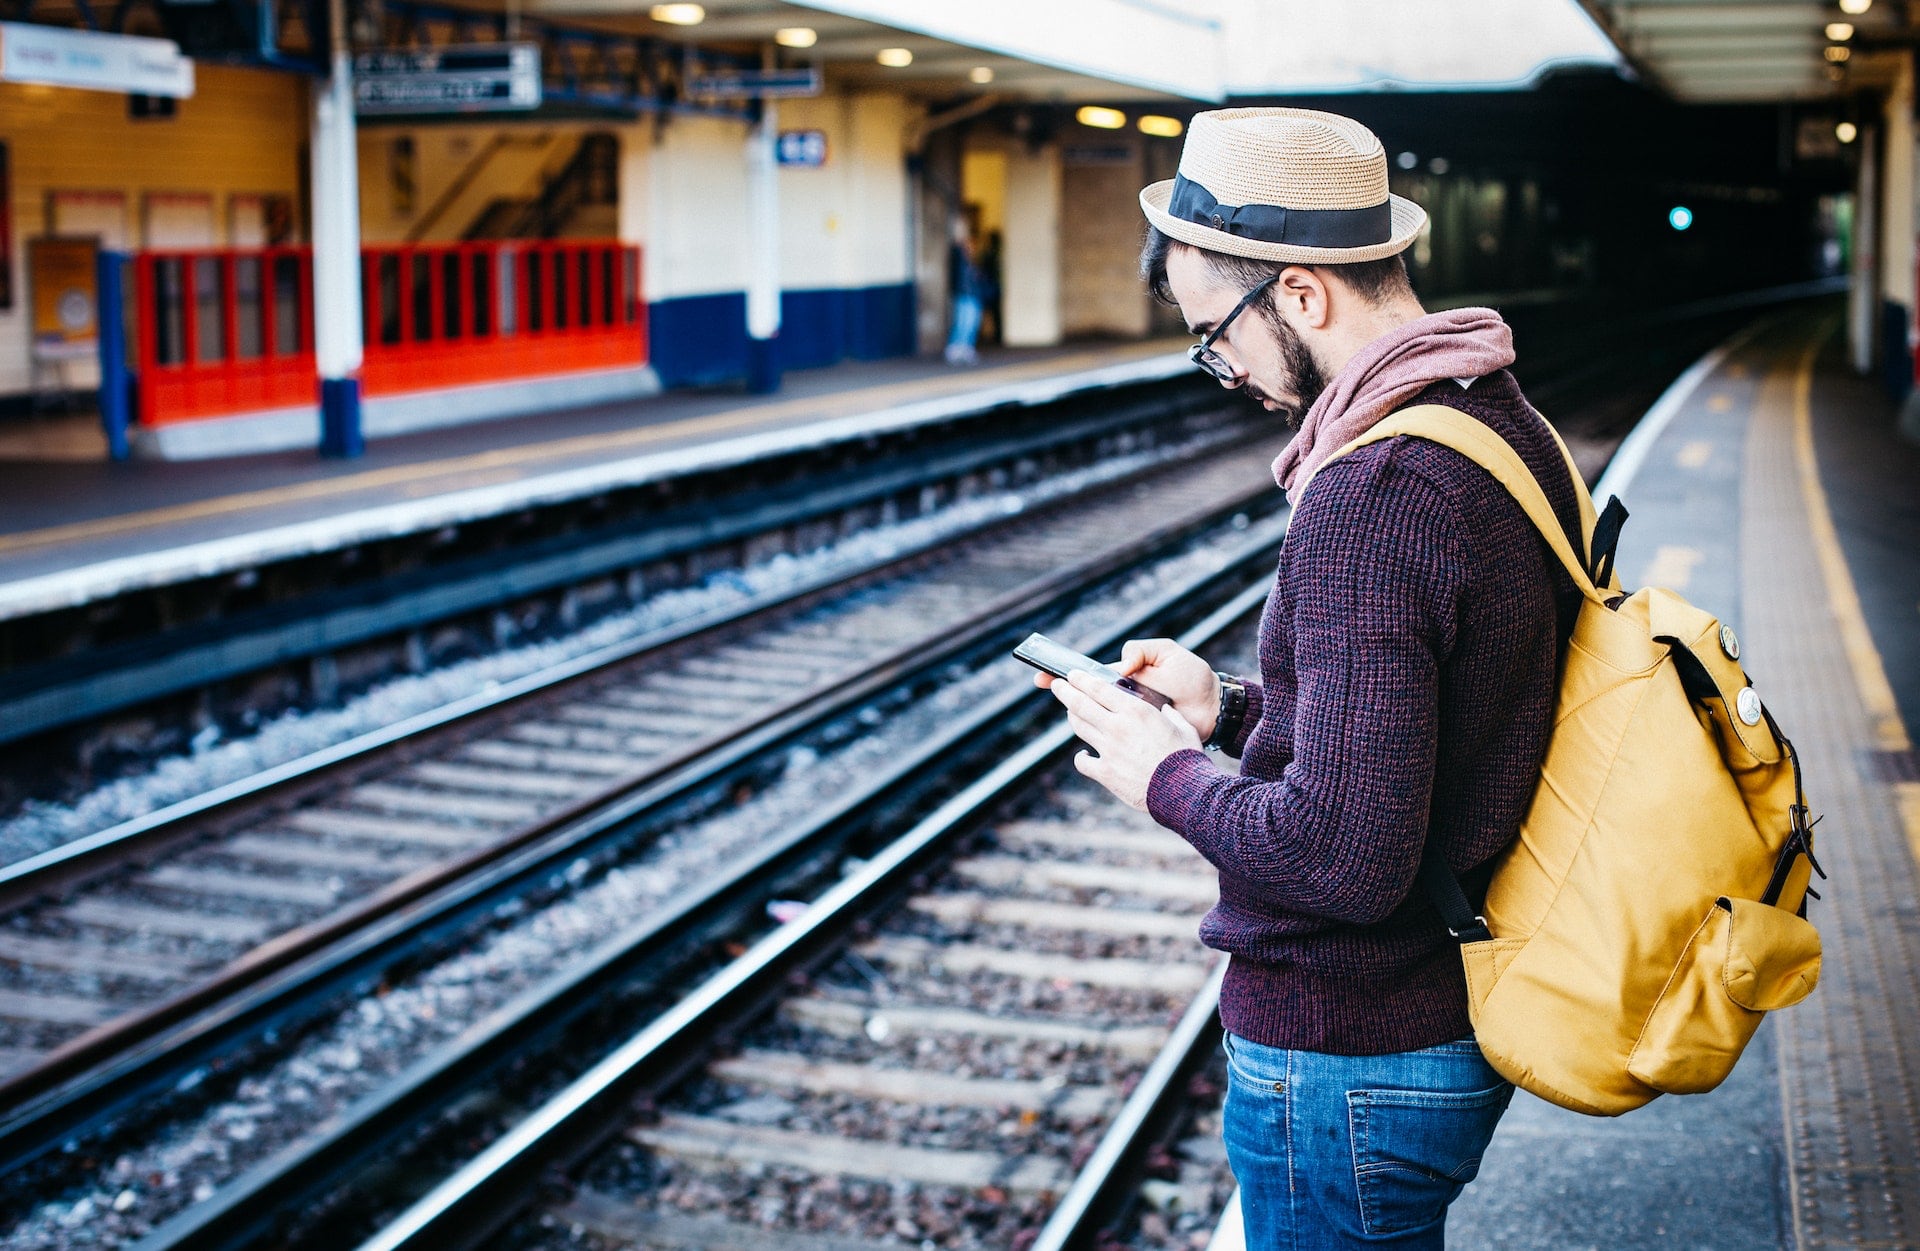 A photo of a man on his phone, standing on a train station platform